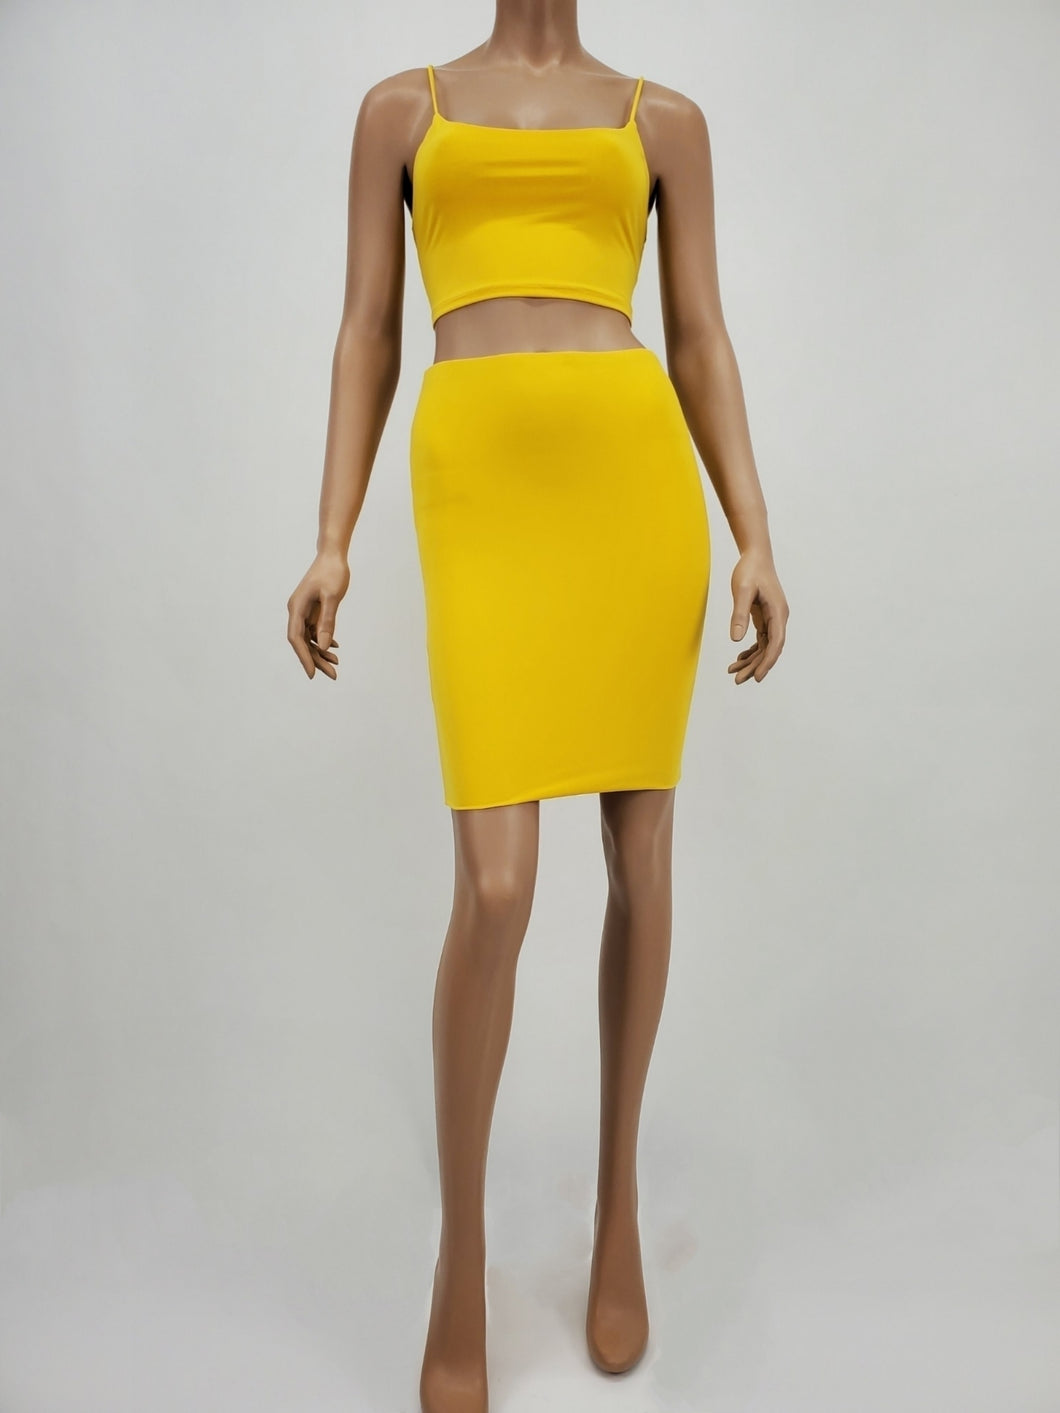 Spaghetti Strap Crop Top and Skirt Set (Yellow)